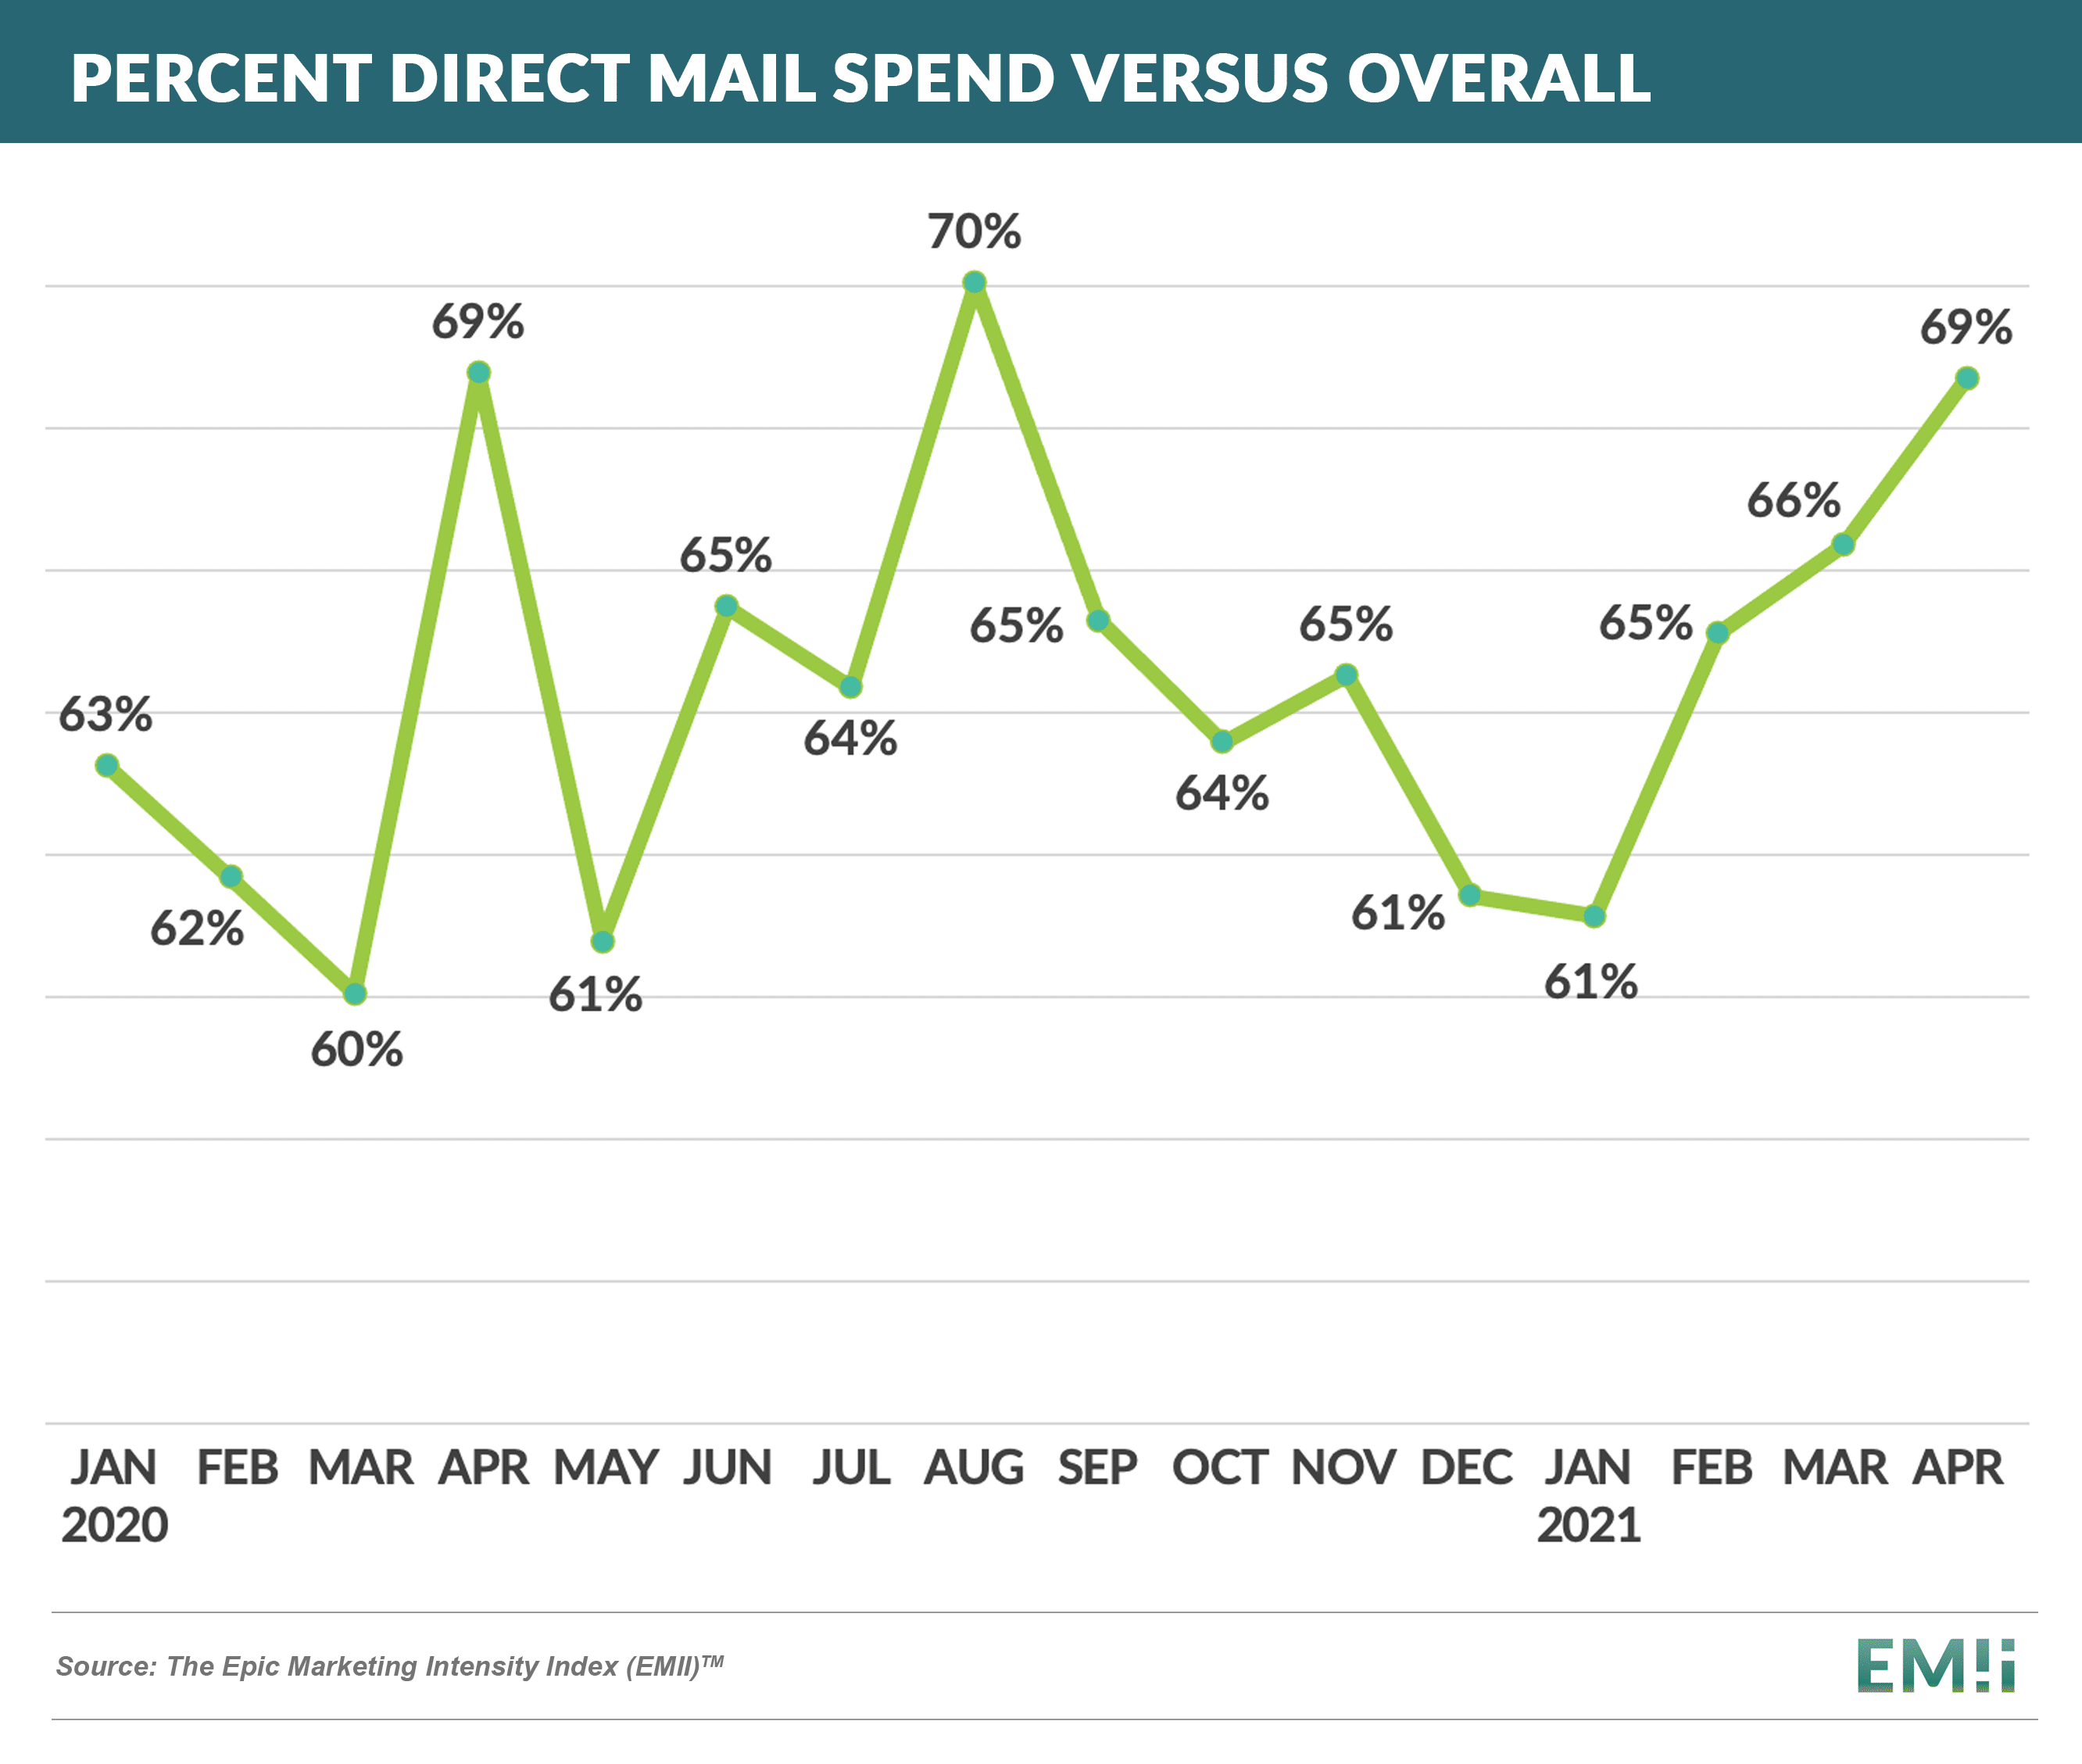 Percent Direct Mail Spend - vs overall 20210605